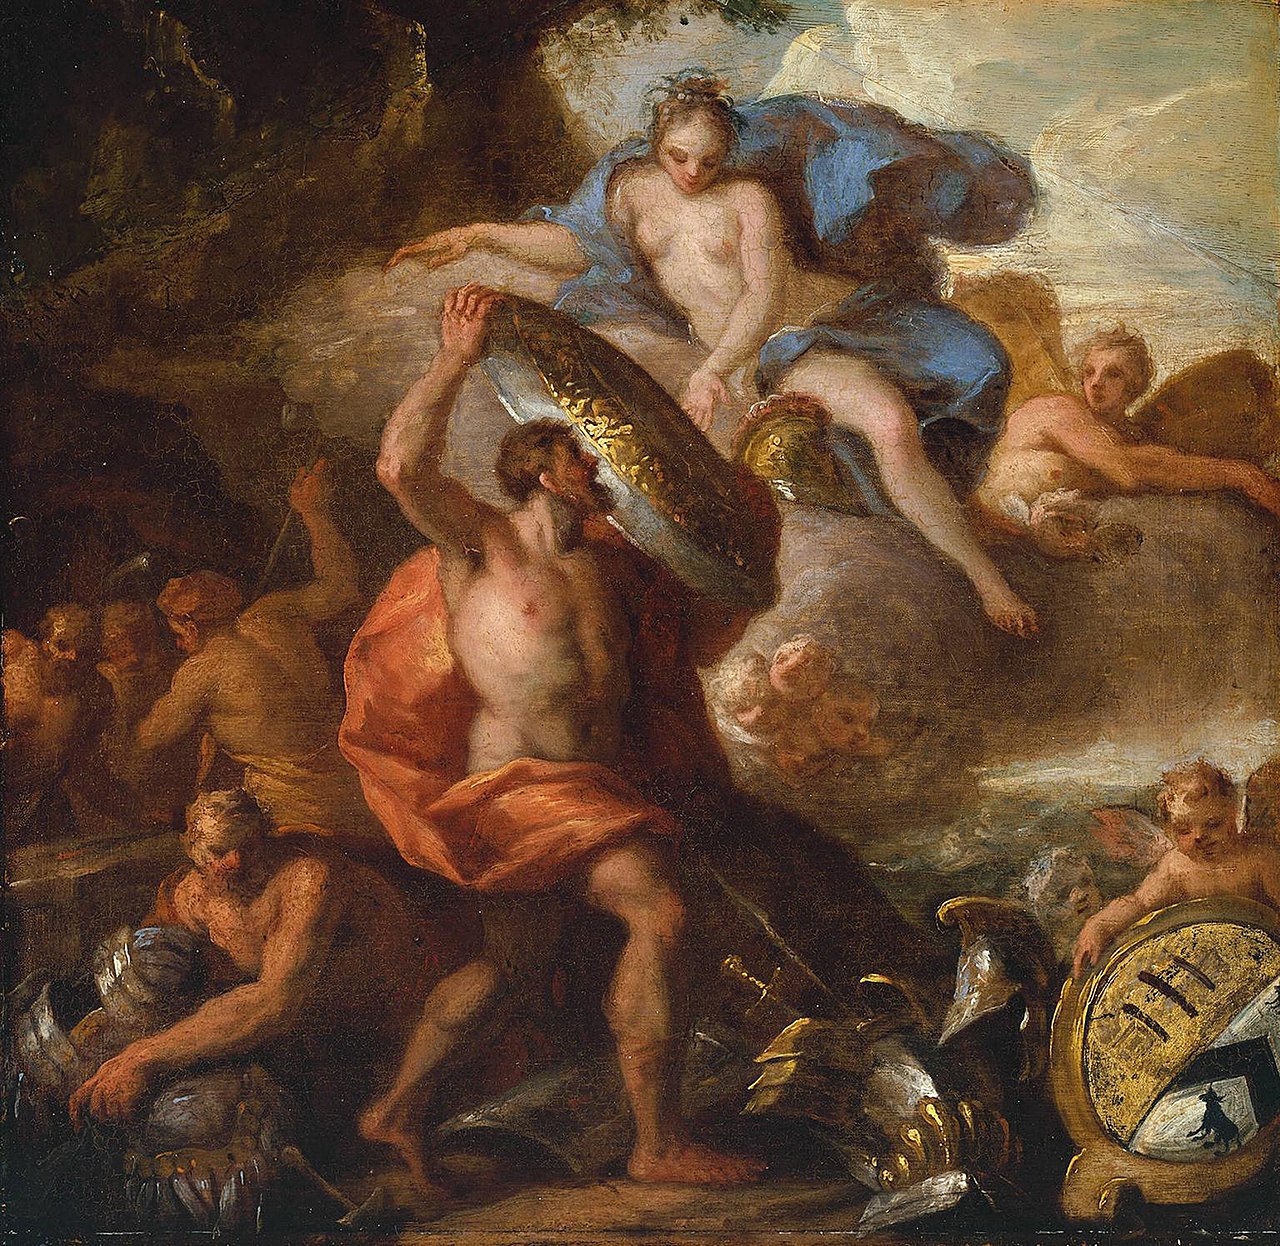 James_Thornhill_-_Thetis_Accepting_the_Shield_of_Achilles_from_Vulcan_c._1710